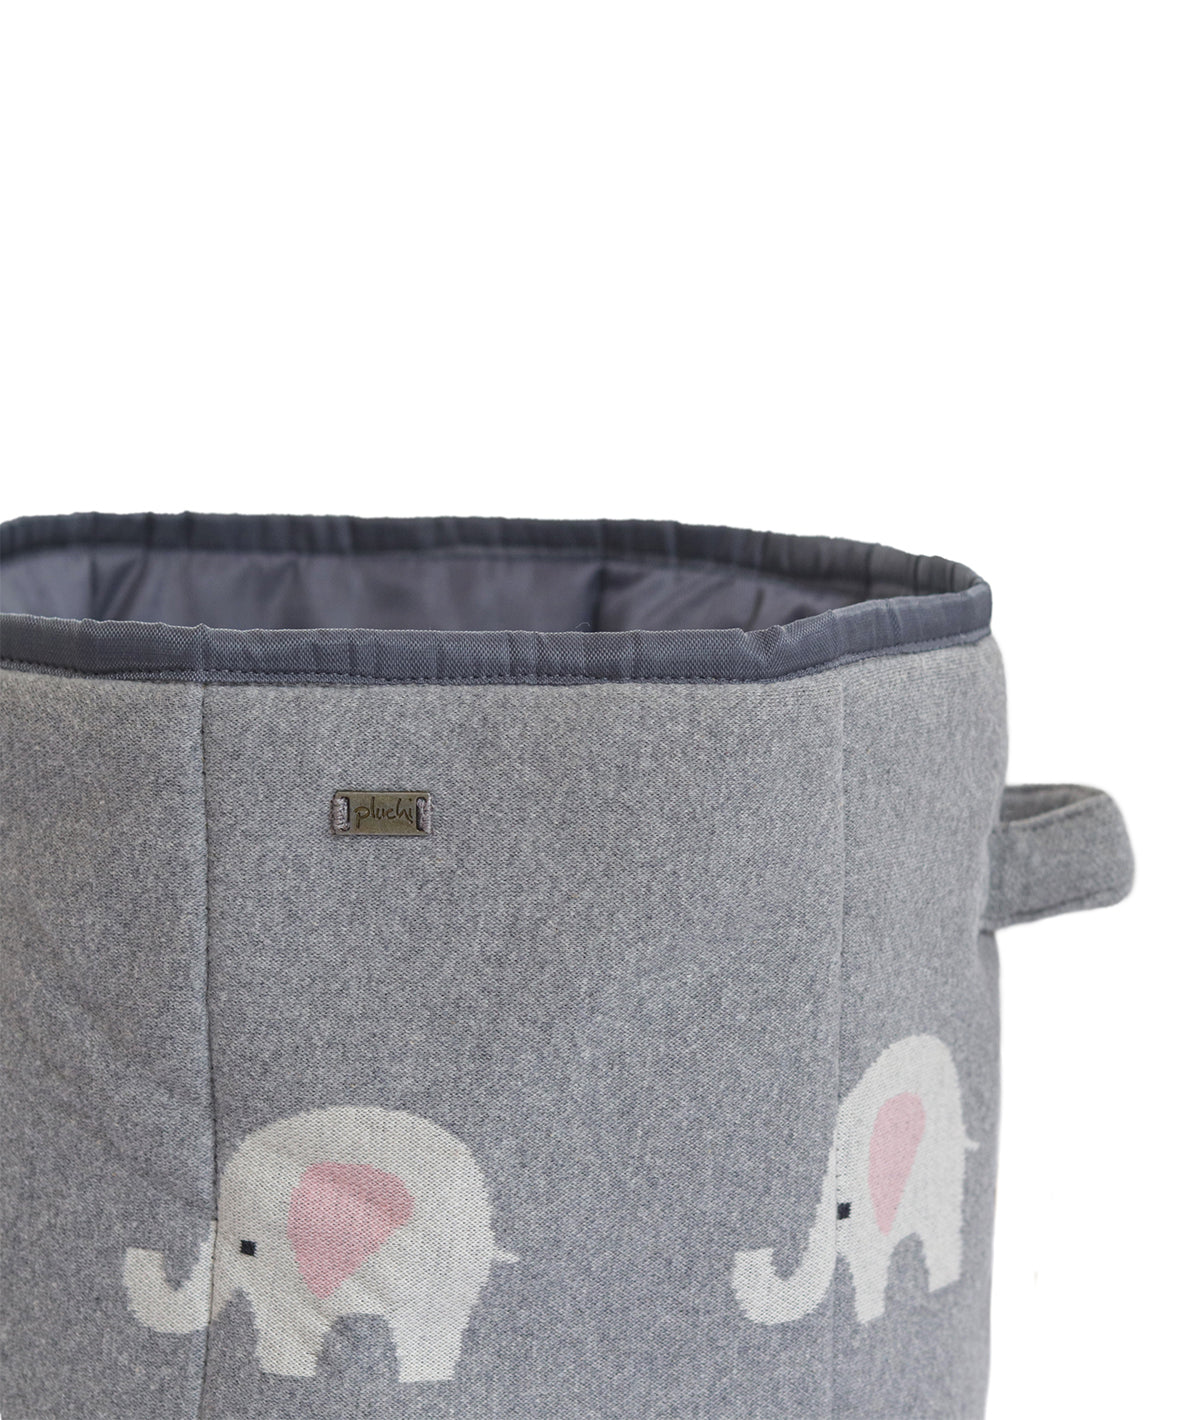 Lovely Elephant Cotton Knitted Large Kids Baskets in Pink Color For Assembling Toys and other Playing Accessories